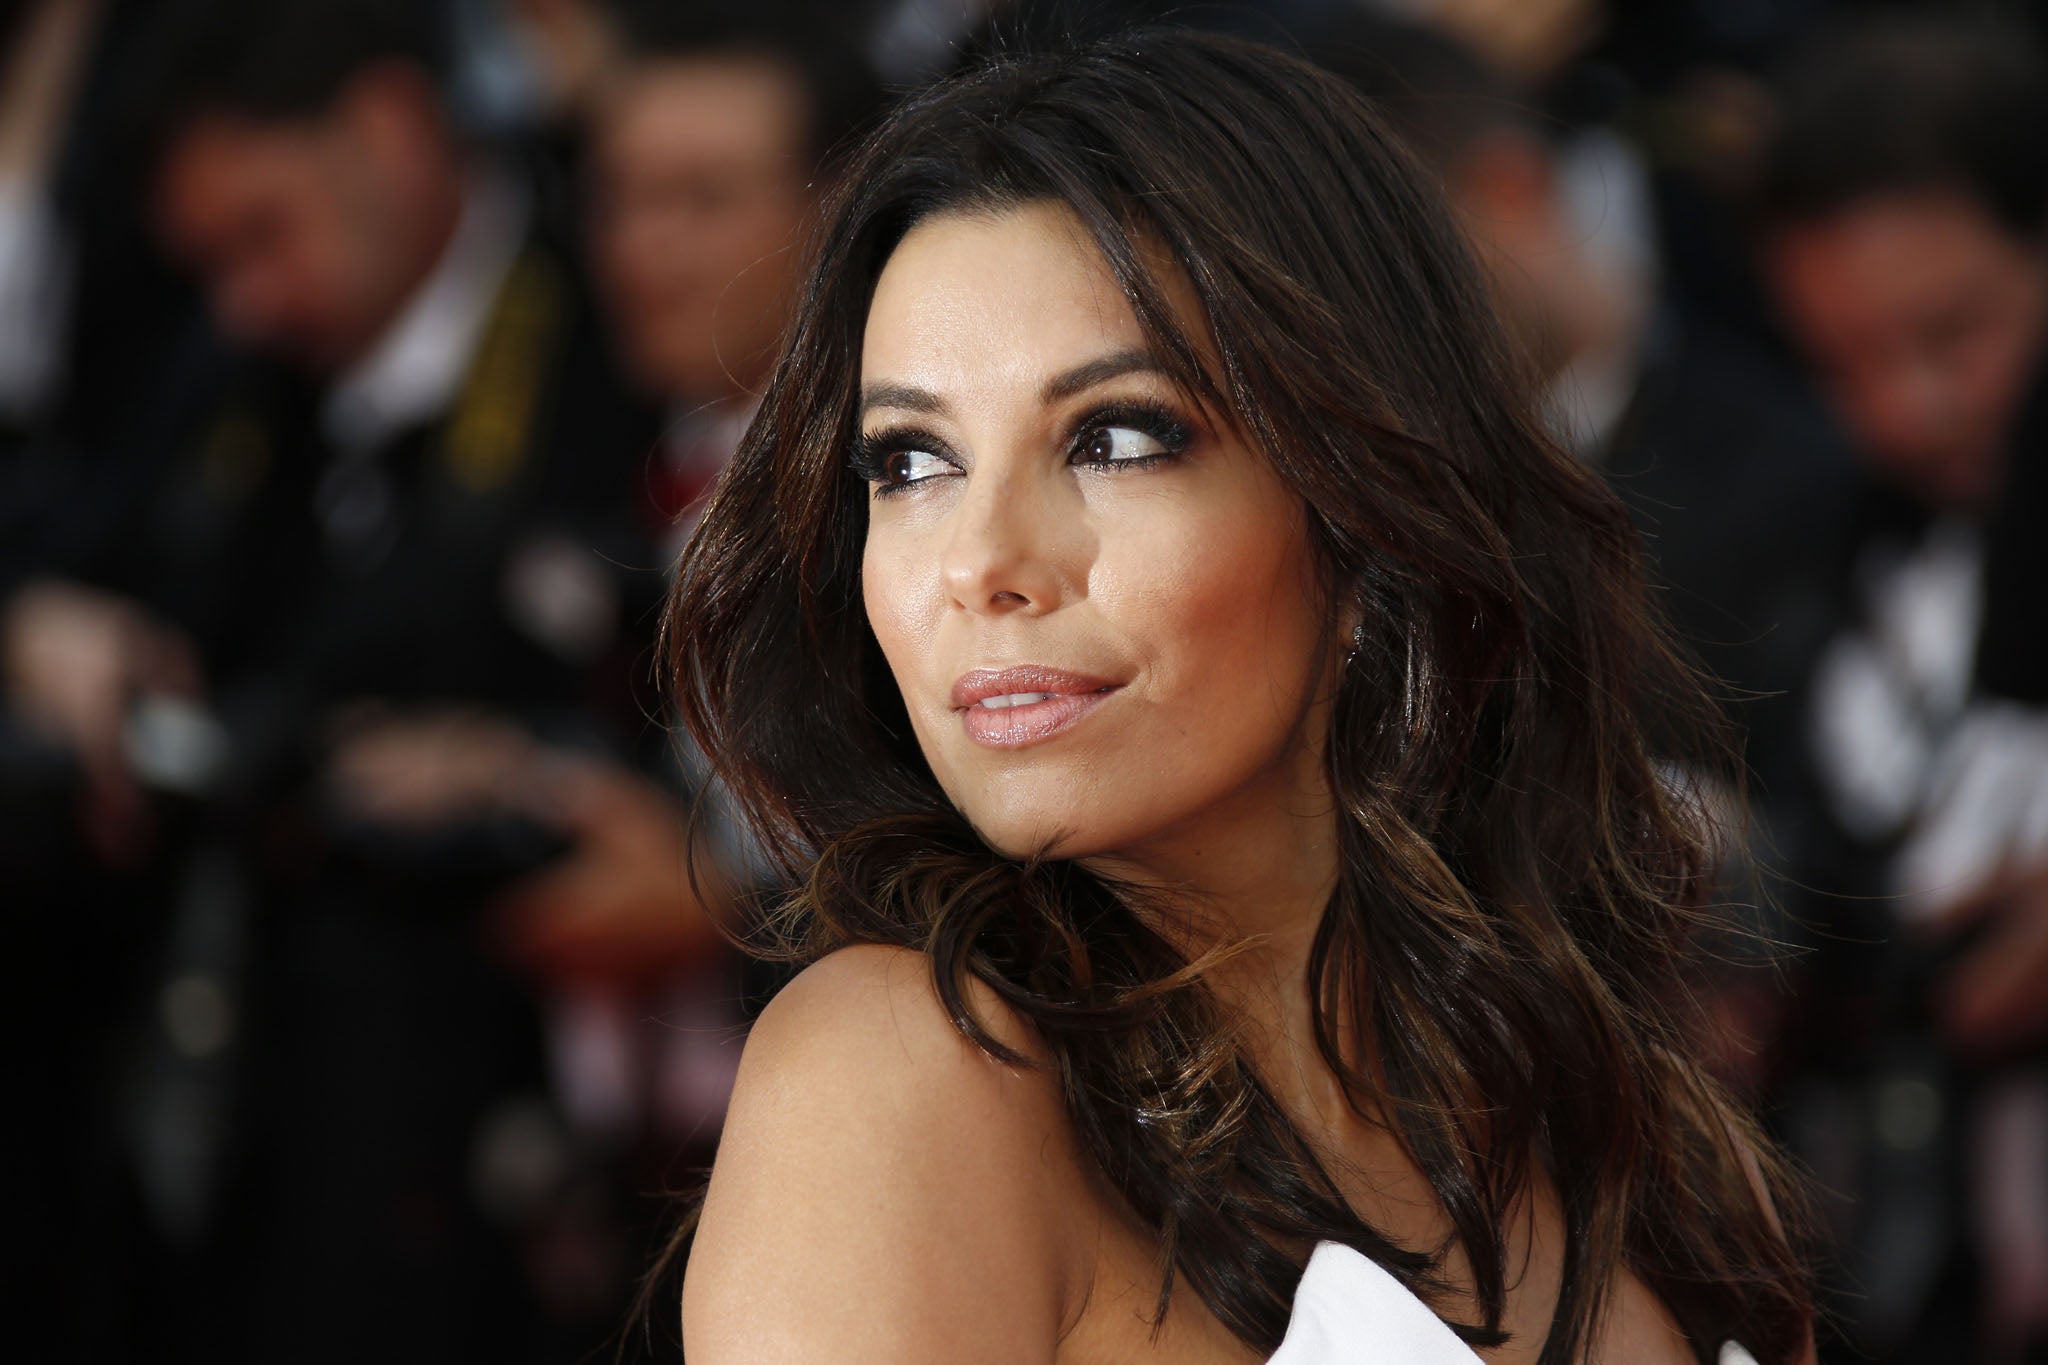 Eva Longoria on naked photo leaks Actress alleges Apple employee accessed her private details without her permission The Independent The Independent